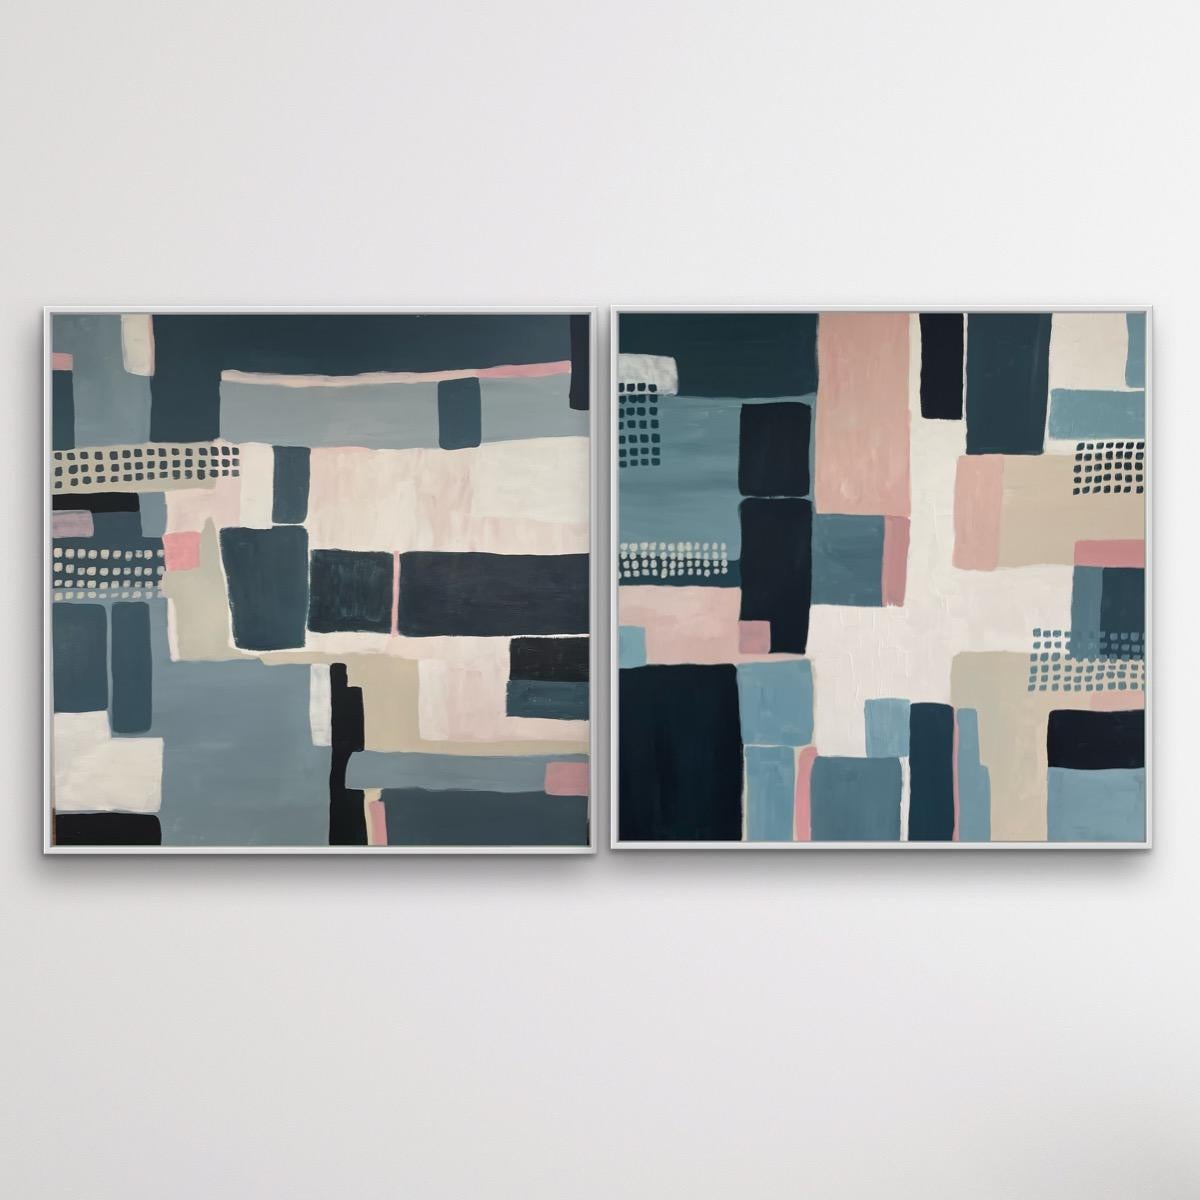 Field Patterns Diptych by Fleur Park [2022]

Complete size of diptych: H:100cm x W:200cm x D:4cm This diptych contains Field Patterns Blue alongside Field Patterns Blue and Pink. This diptych contains a sophisticated colour palette and considered